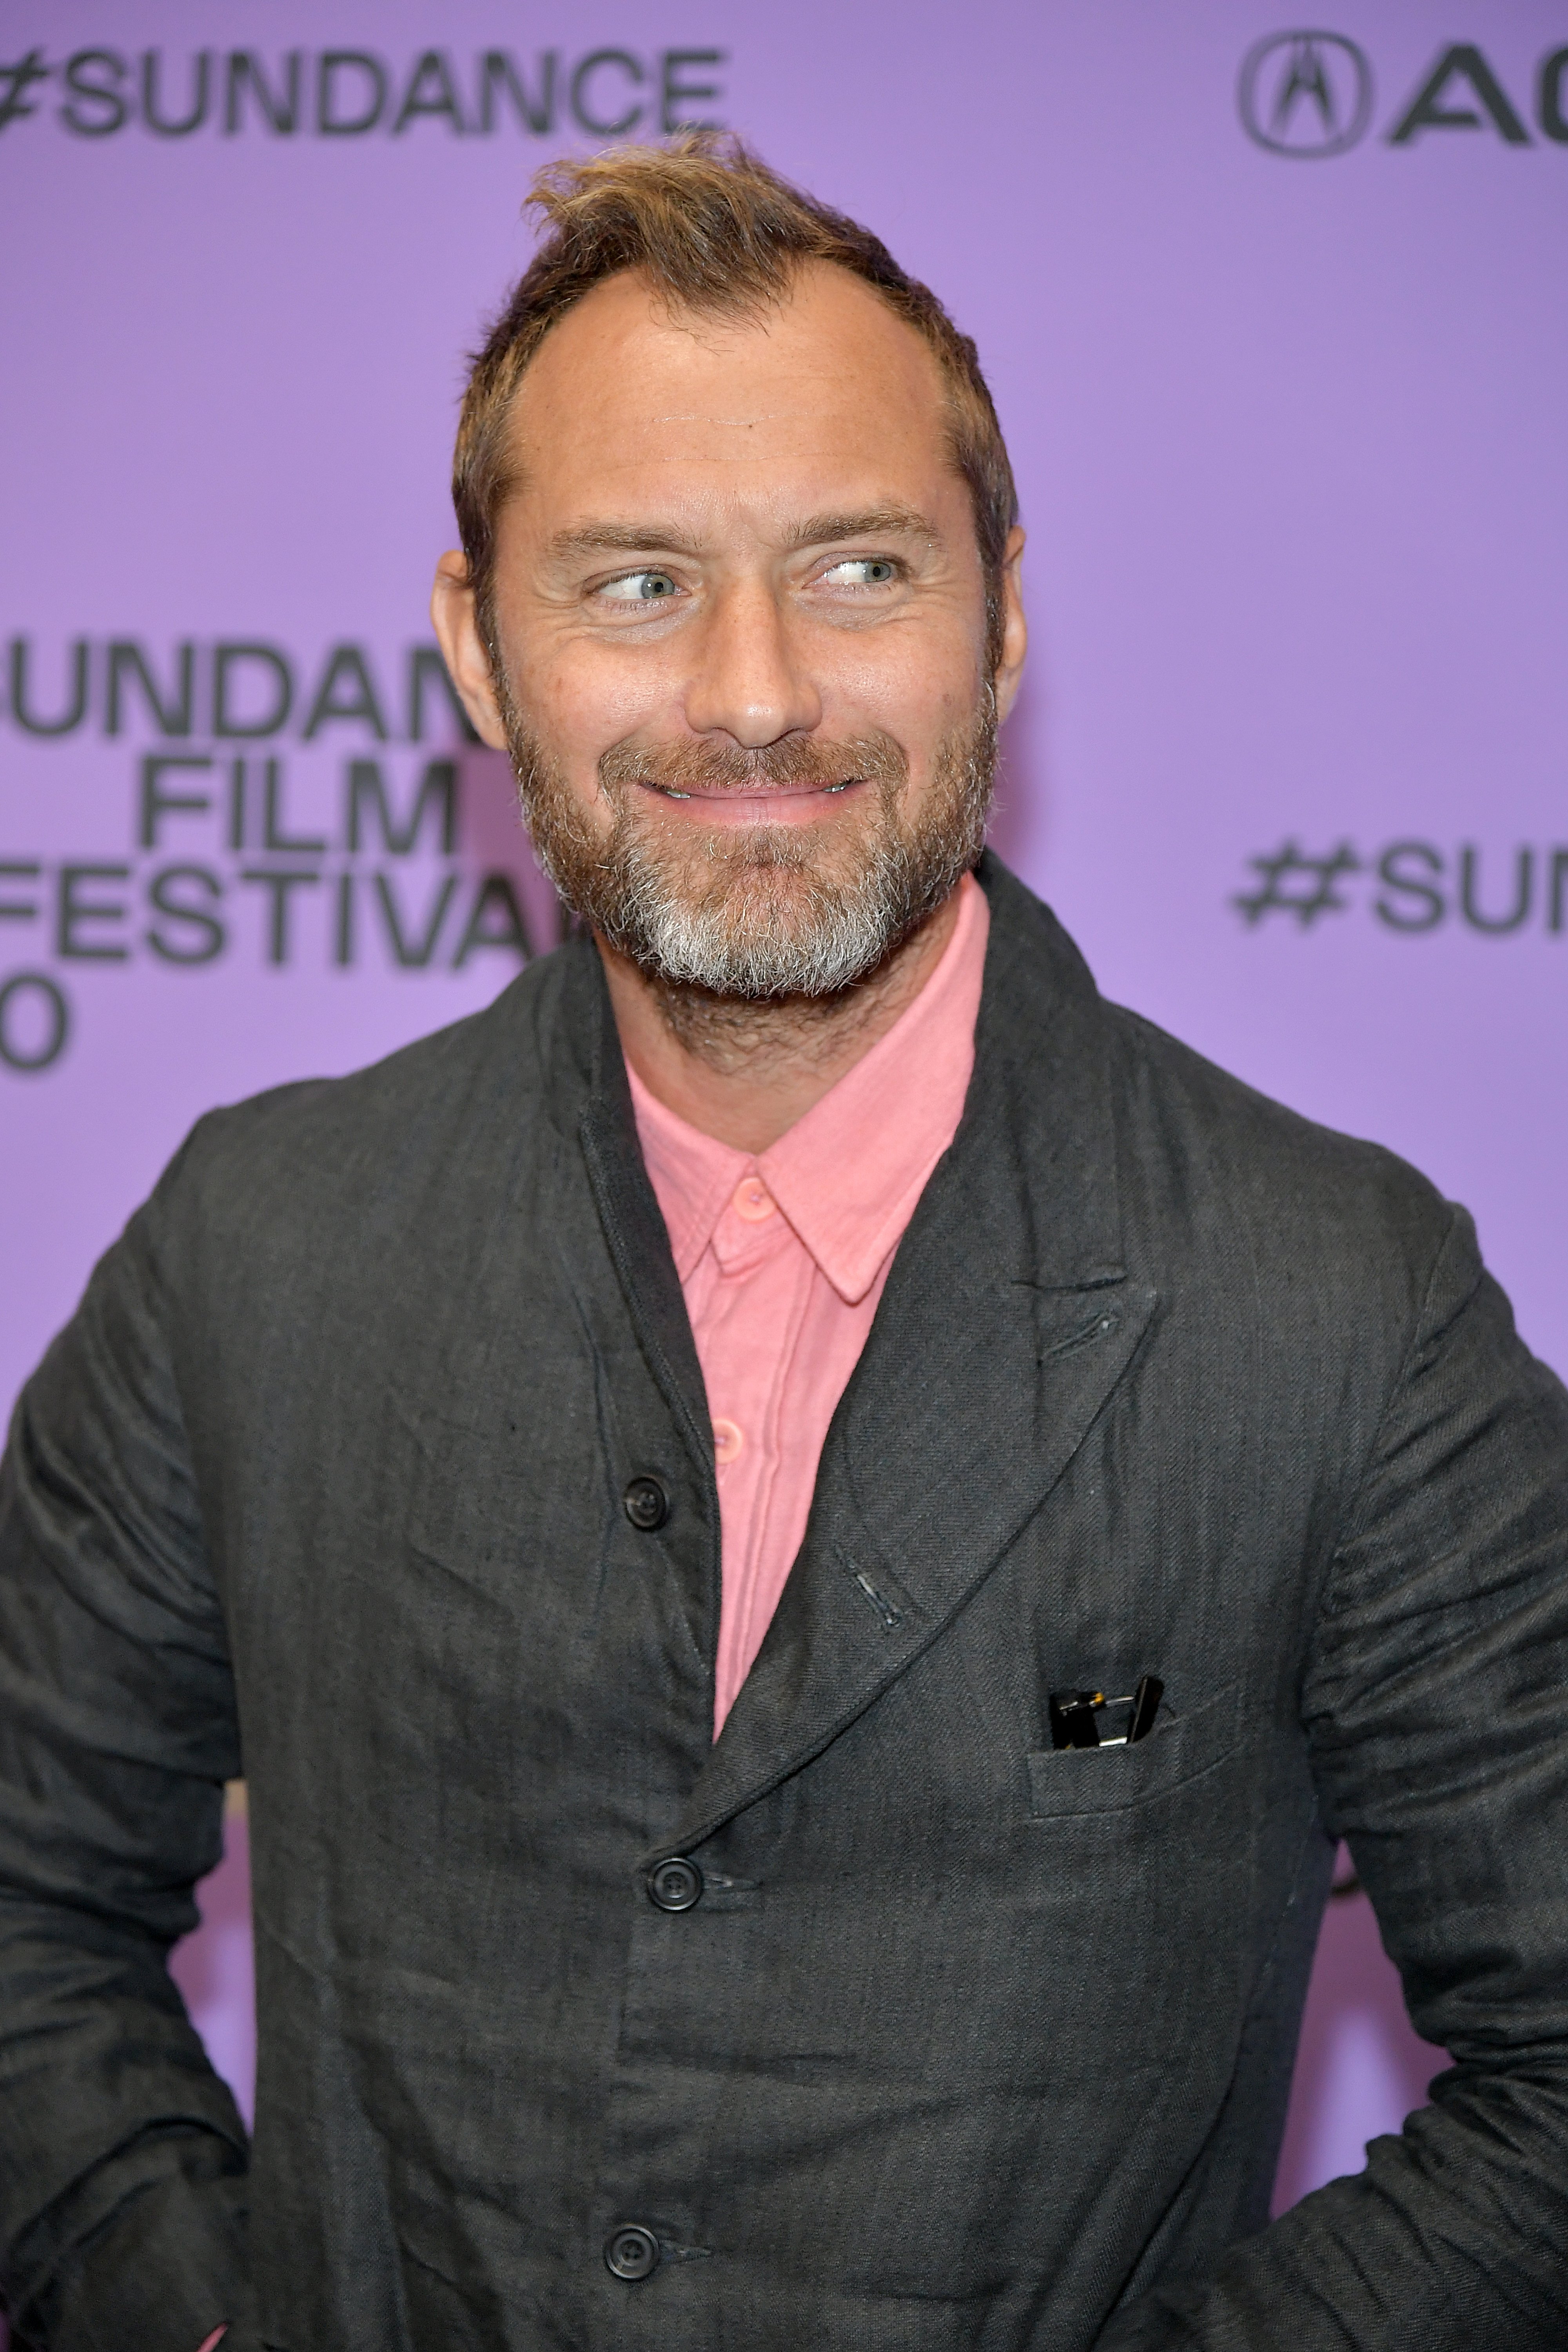 Jude Law at the 2020 Sundance Film Festival for the premiere of "The Nest" on January 26, 2020 | Source: Getty Images